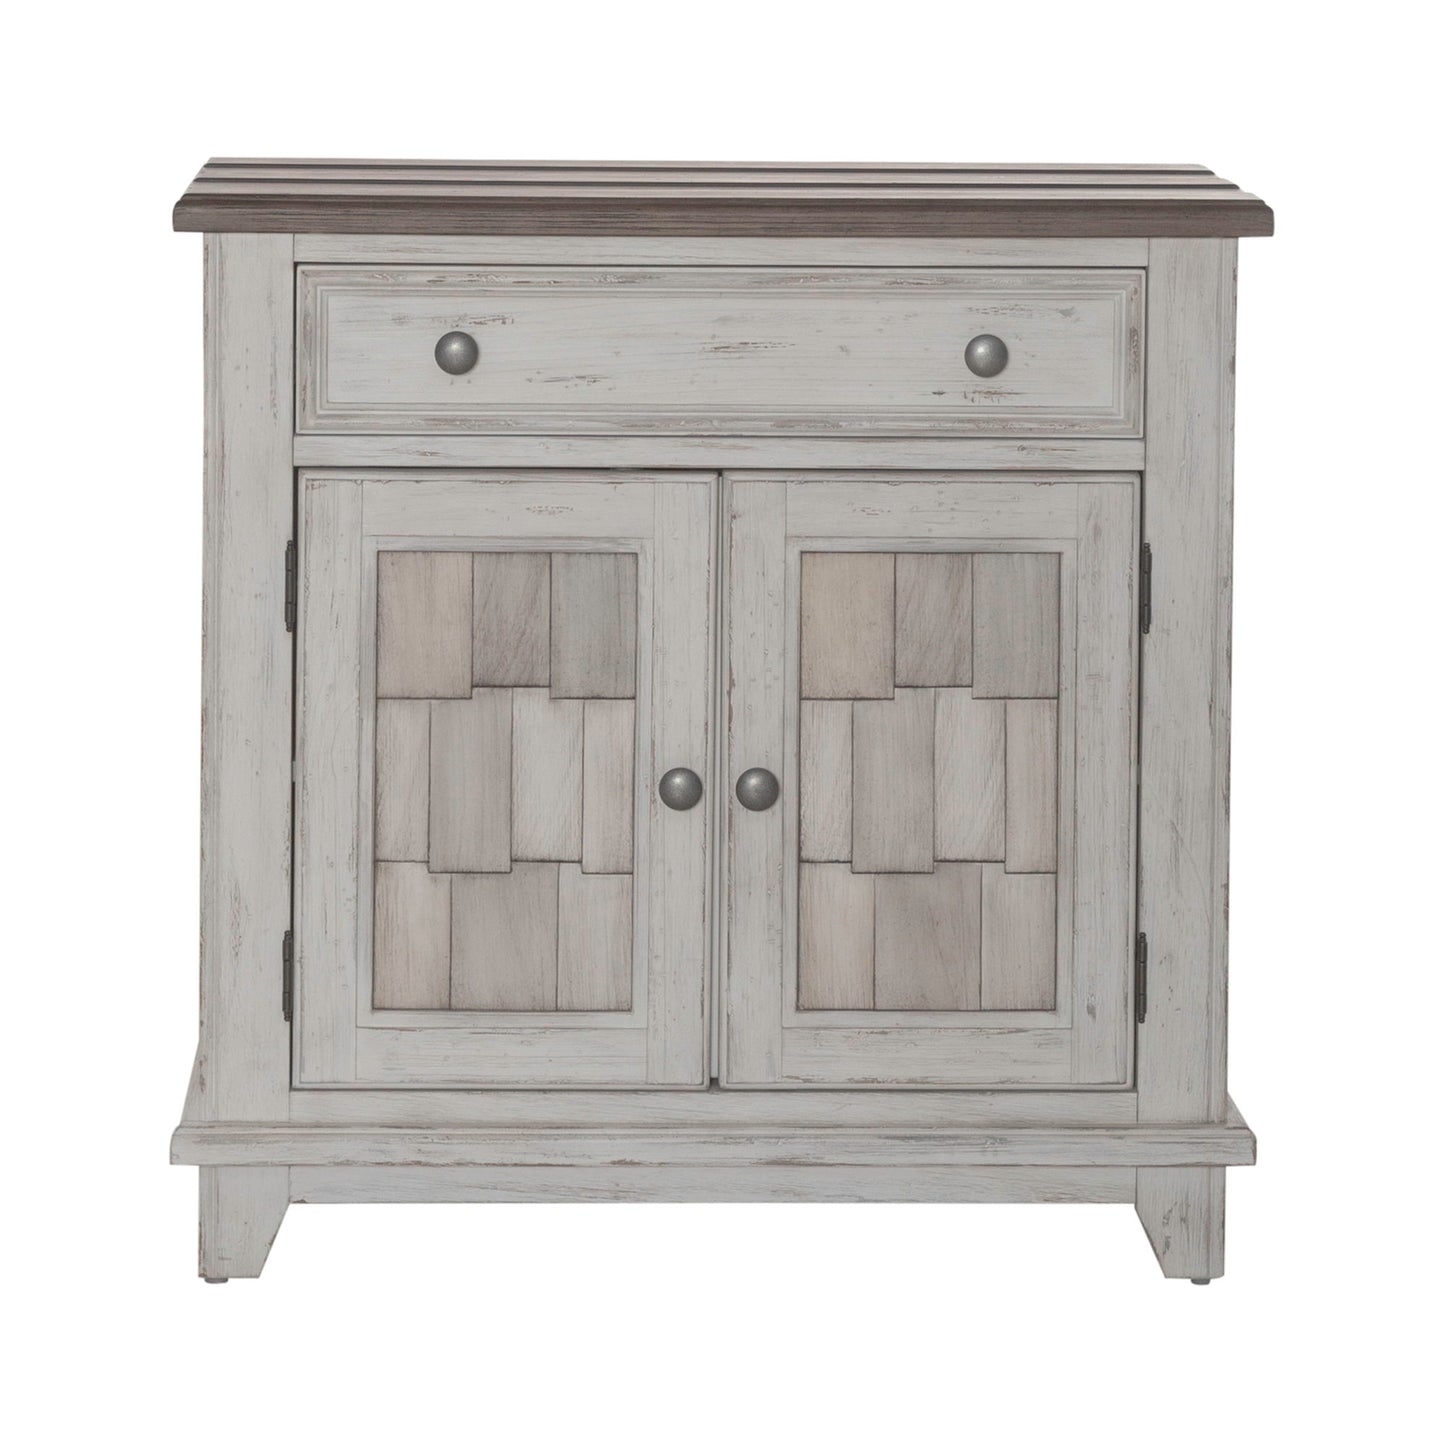 River Place - Accent Cabinet - White